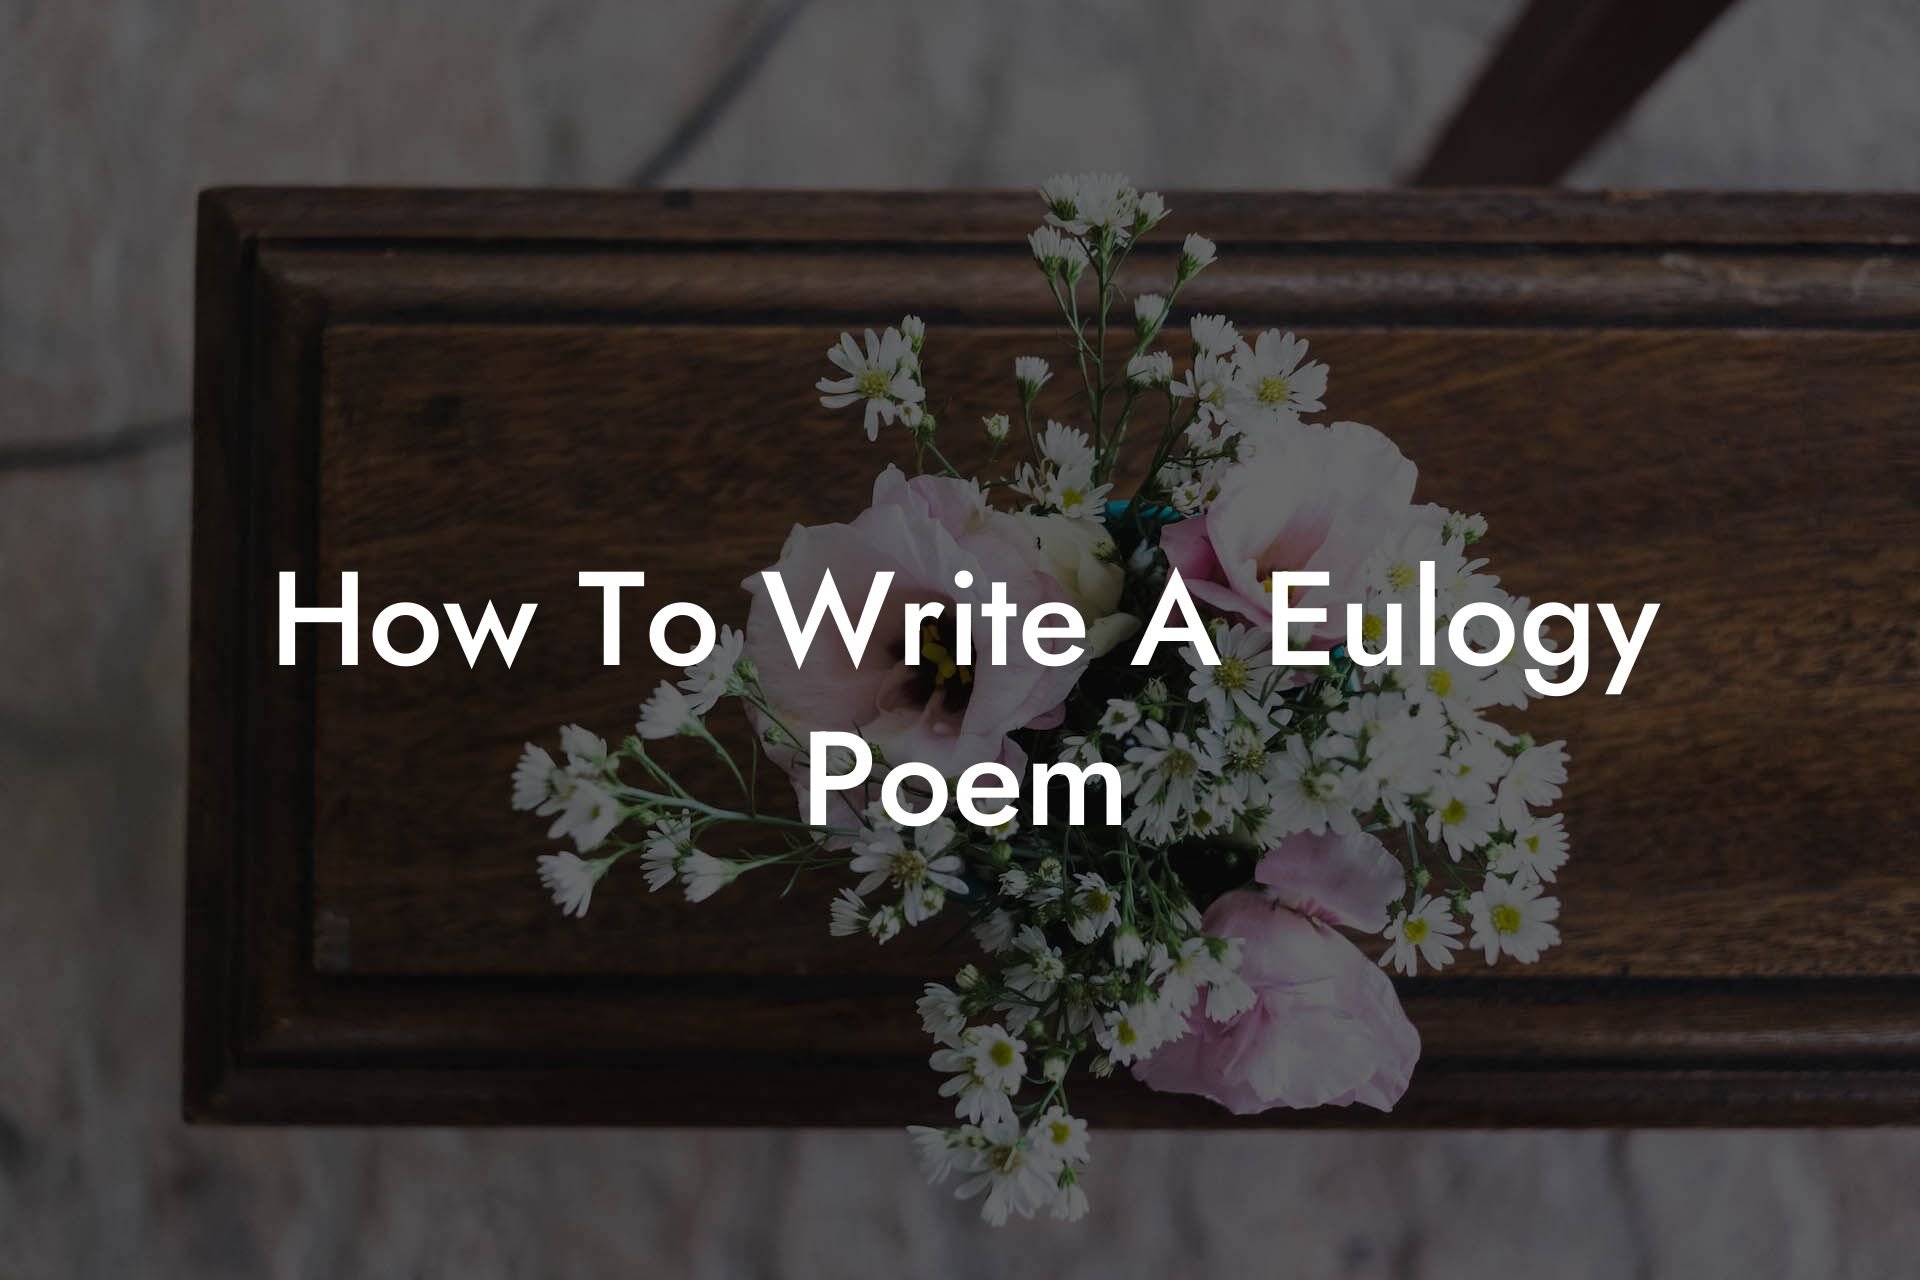 How To Write A Eulogy Poem